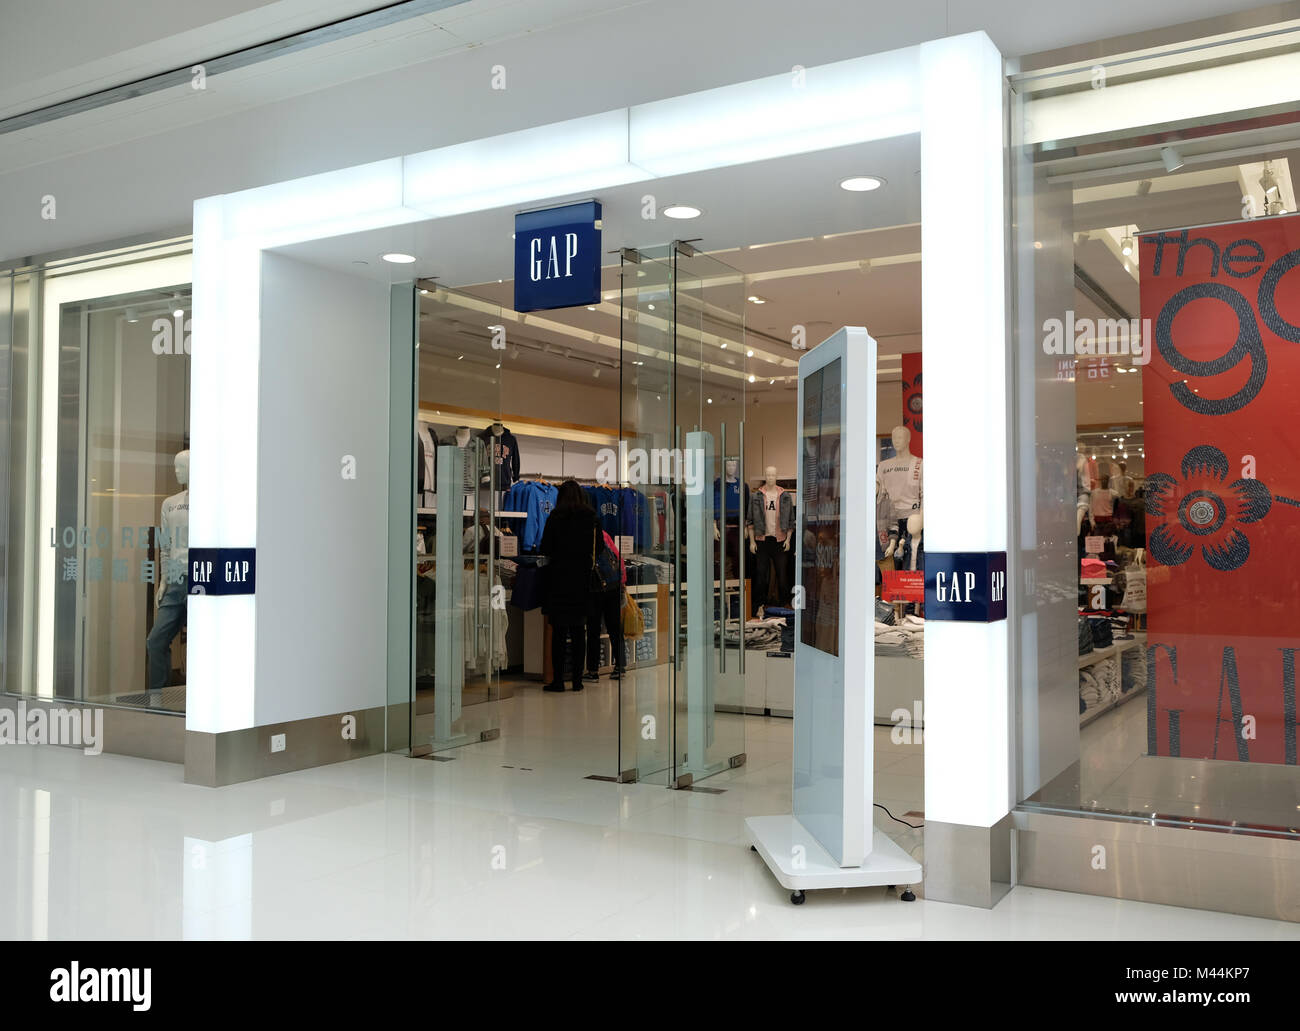 HONG KONG - FEBRUARY 4, 2018: Gap store in Hong Kong. Gap is an American multinational clothing and accessories retailer. Stock Photo